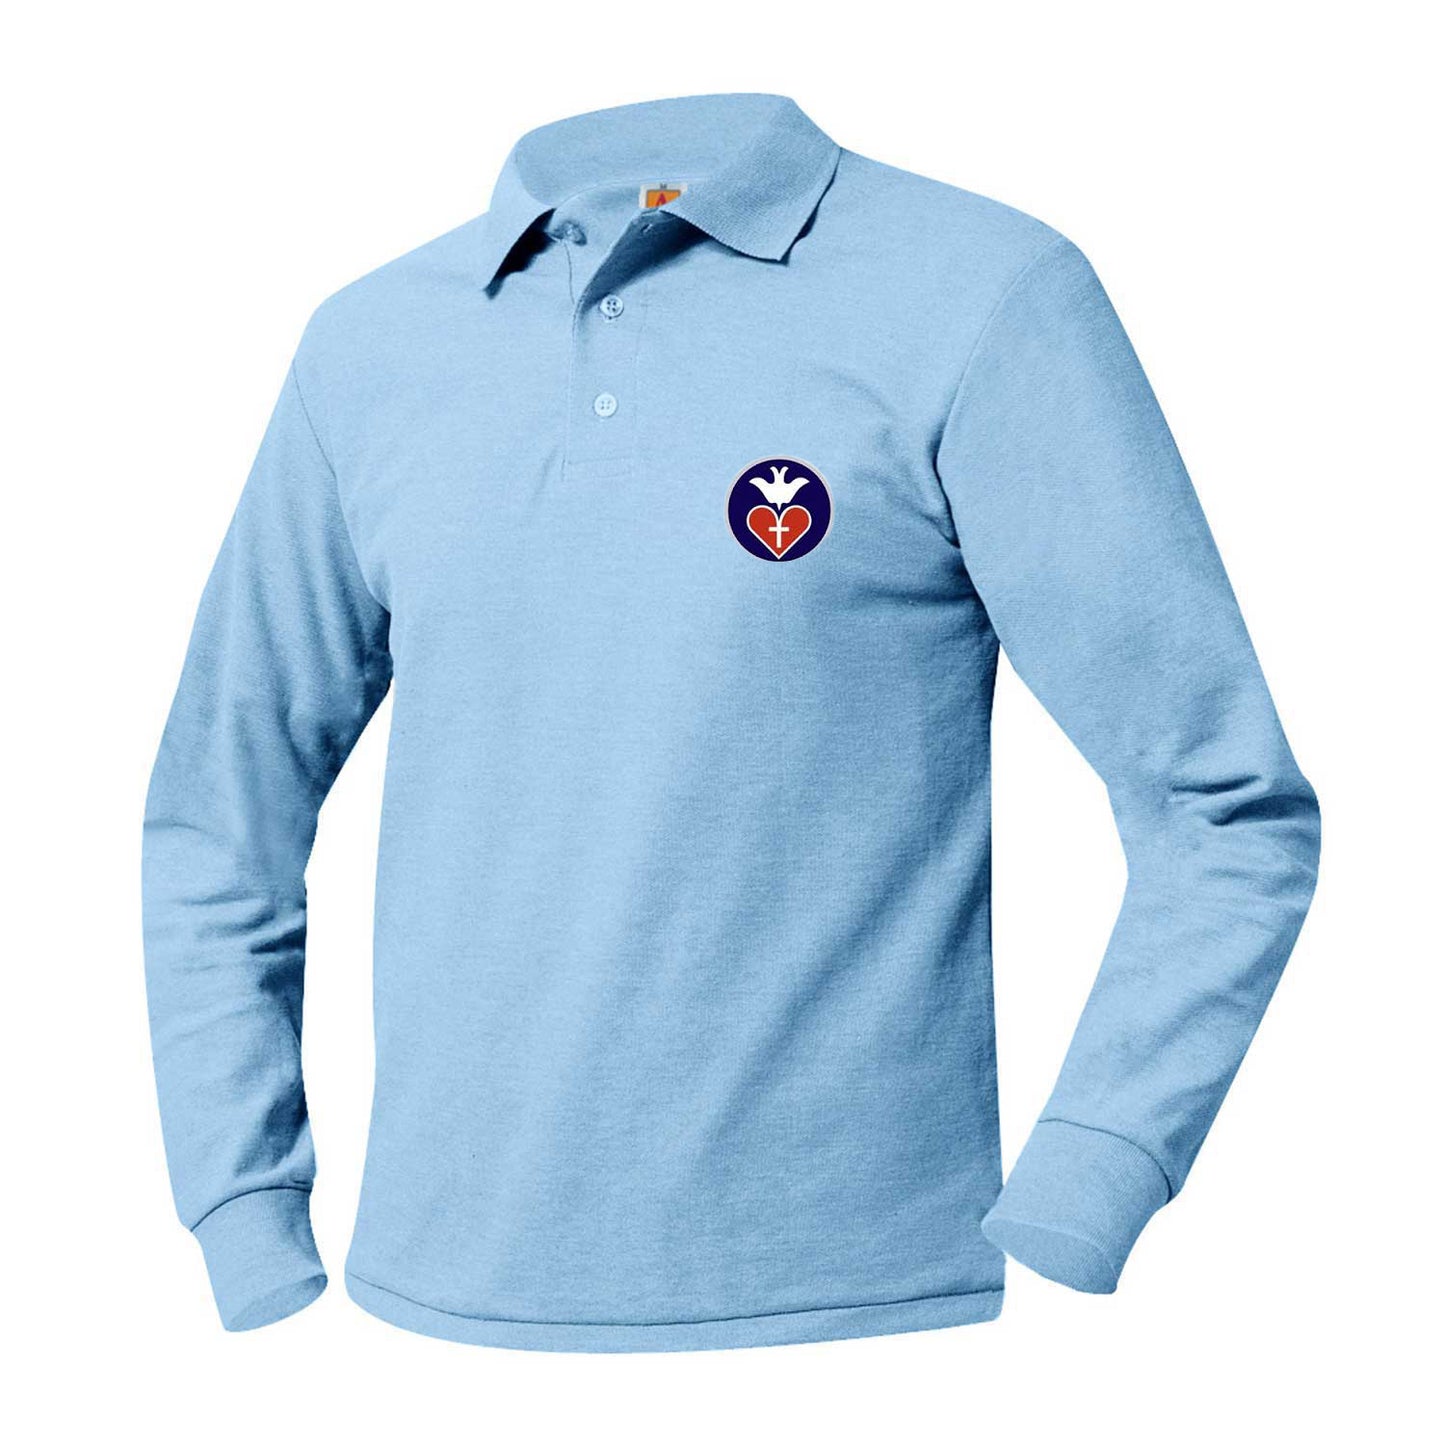 Youth Long Sleeve Pique Polo With St. Vincent De Paul Logo